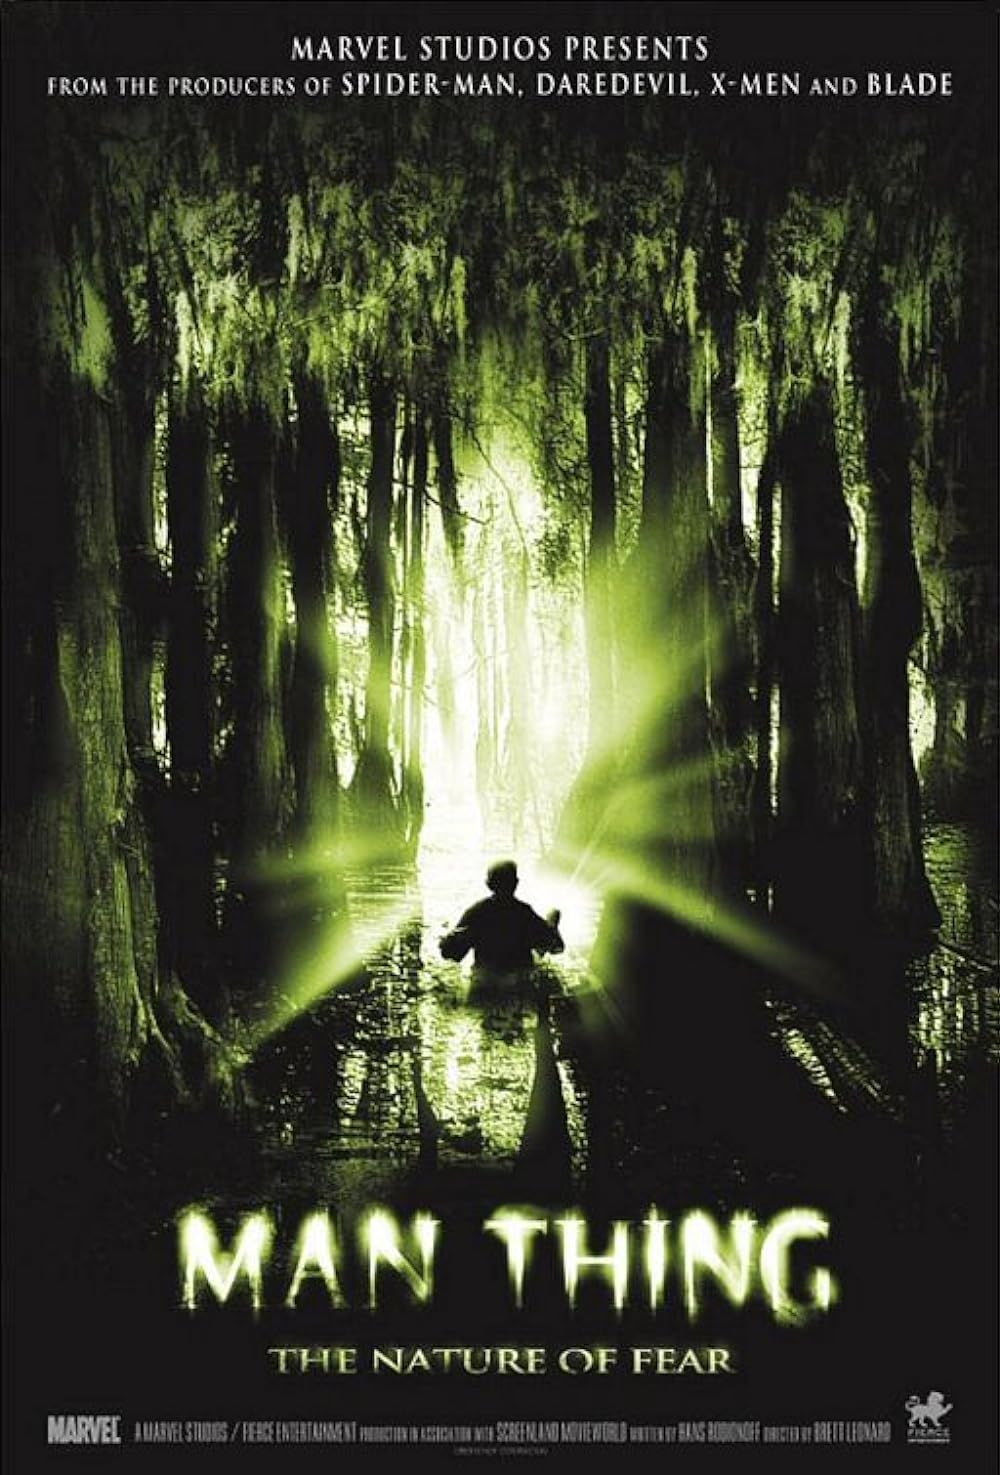 The Silhouette of a Man Walking through a Swamp on the Man-Thing Poster